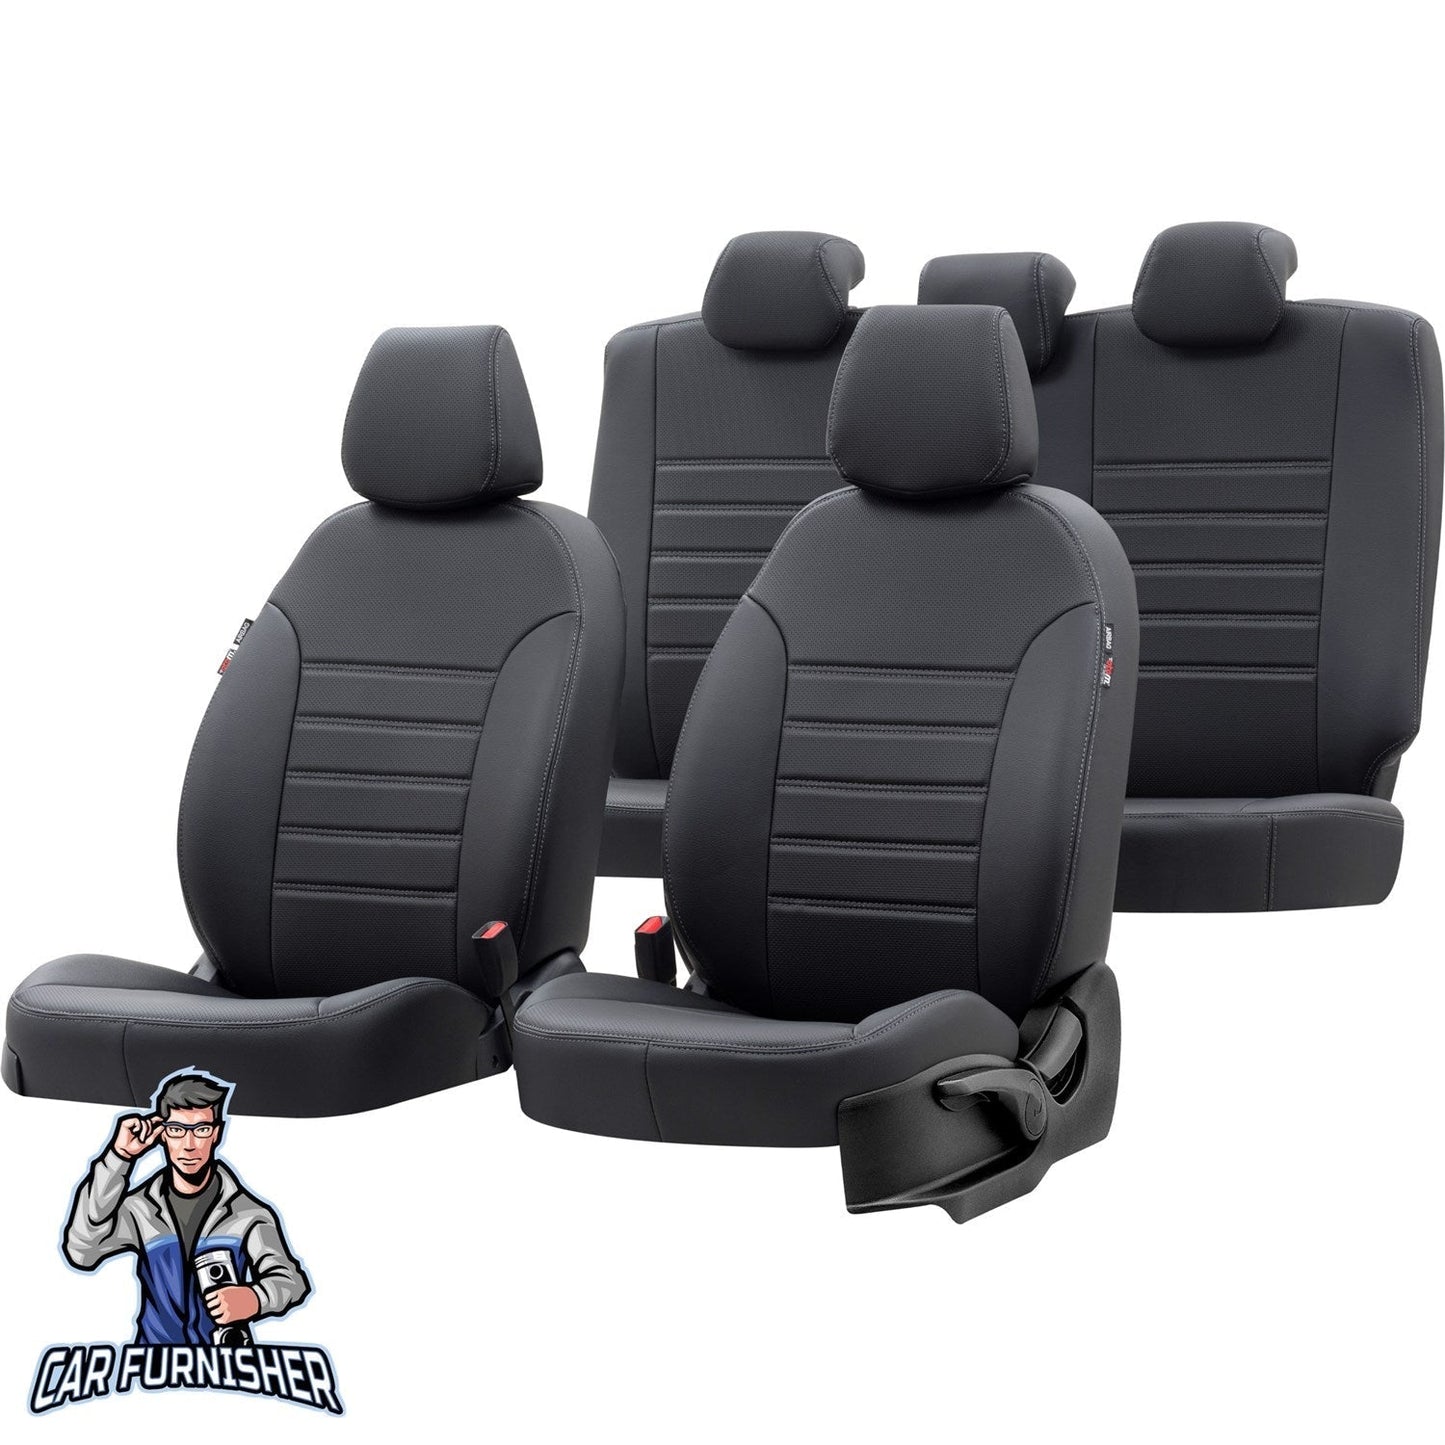 Skoda Roomstar Seat Cover New York Leather Design Black Leather